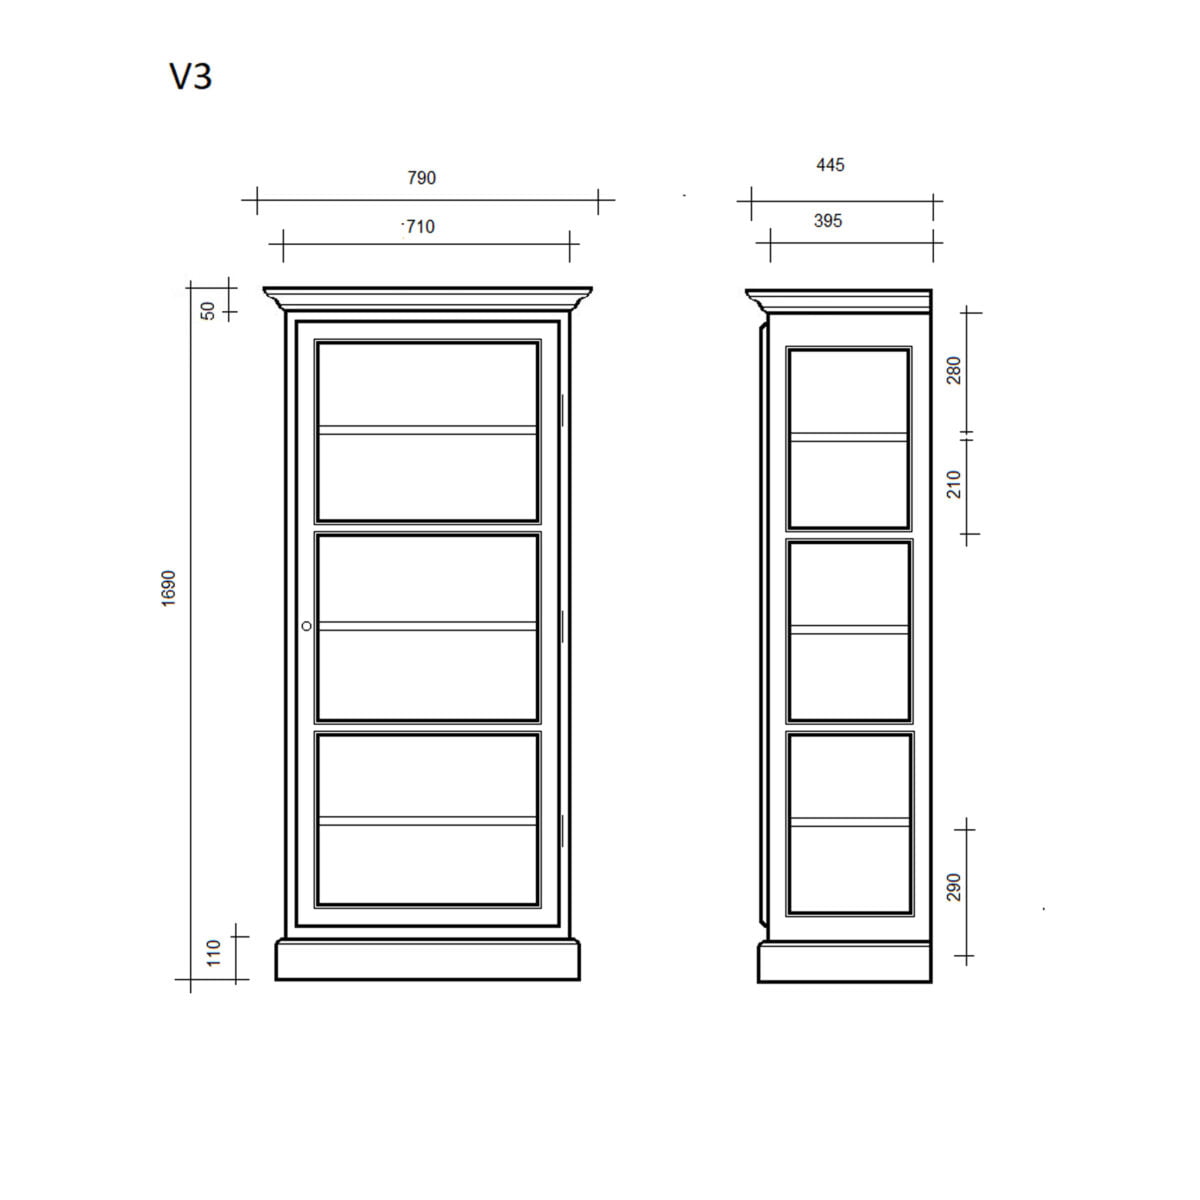 Lindebjerg Design drawing V3 Classic